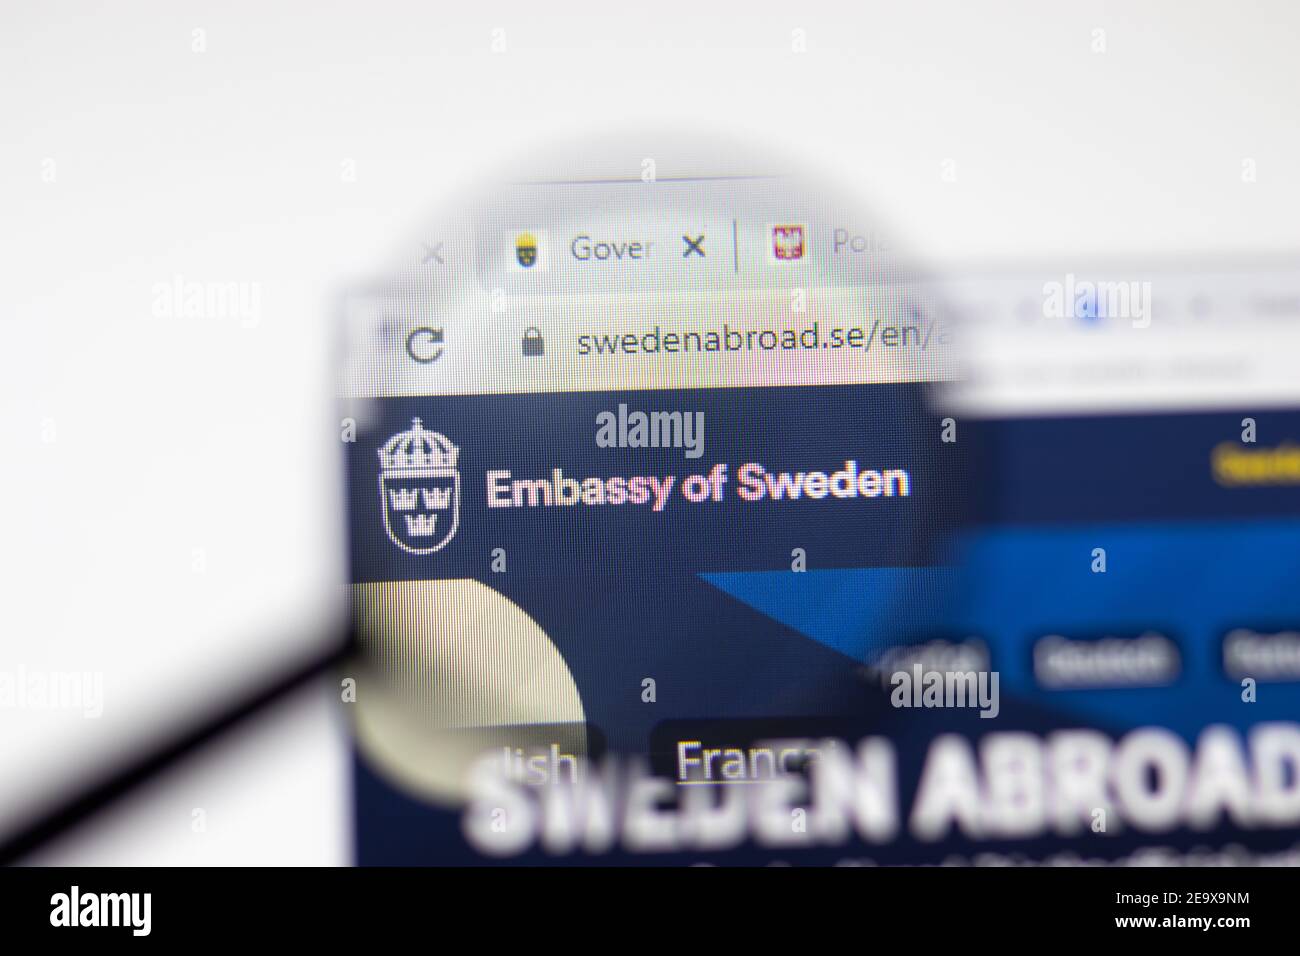 Los Angeles, USA - 1 February 2021: Embassy of Sweden website page. Swedenabroad.se logo on display screen, Illustrative Editorial Stock Photo